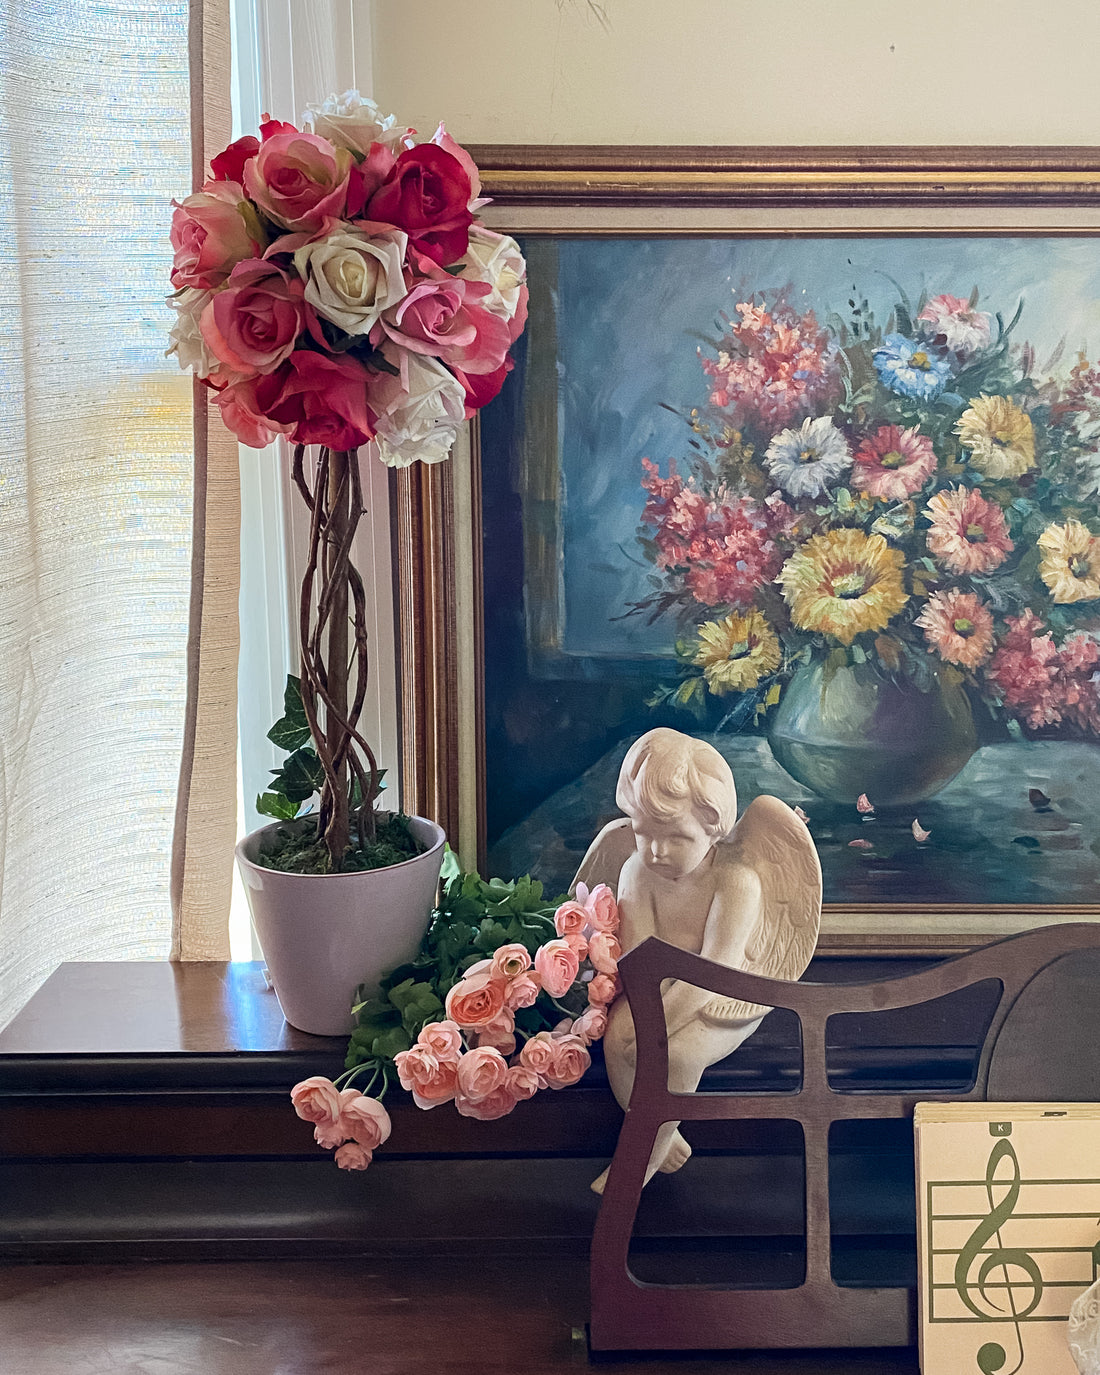 pink rose topiary and cherub statue on piano in front of floral painting